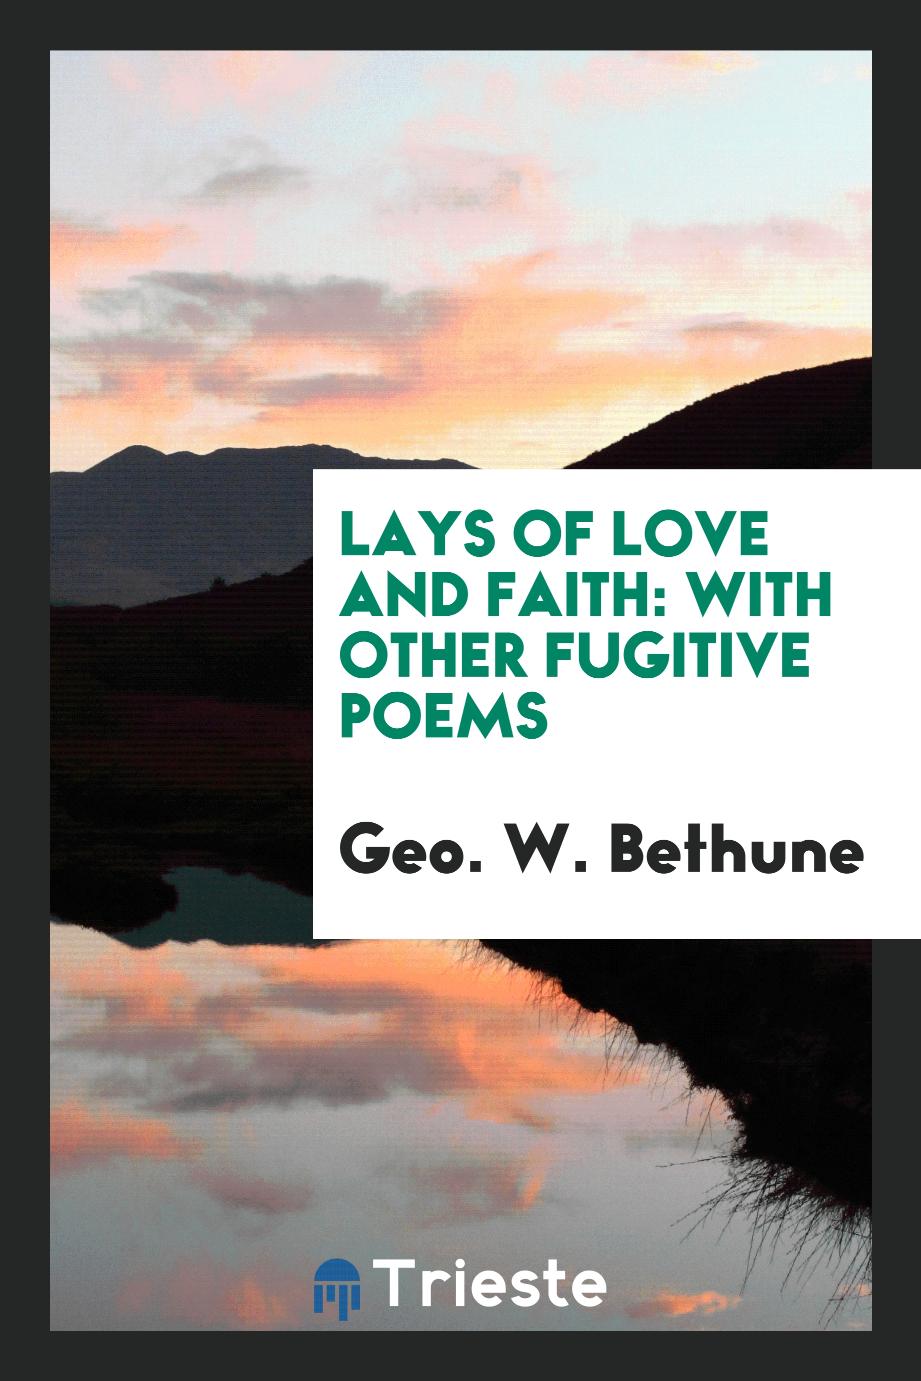 Lays of Love and Faith: With Other Fugitive Poems